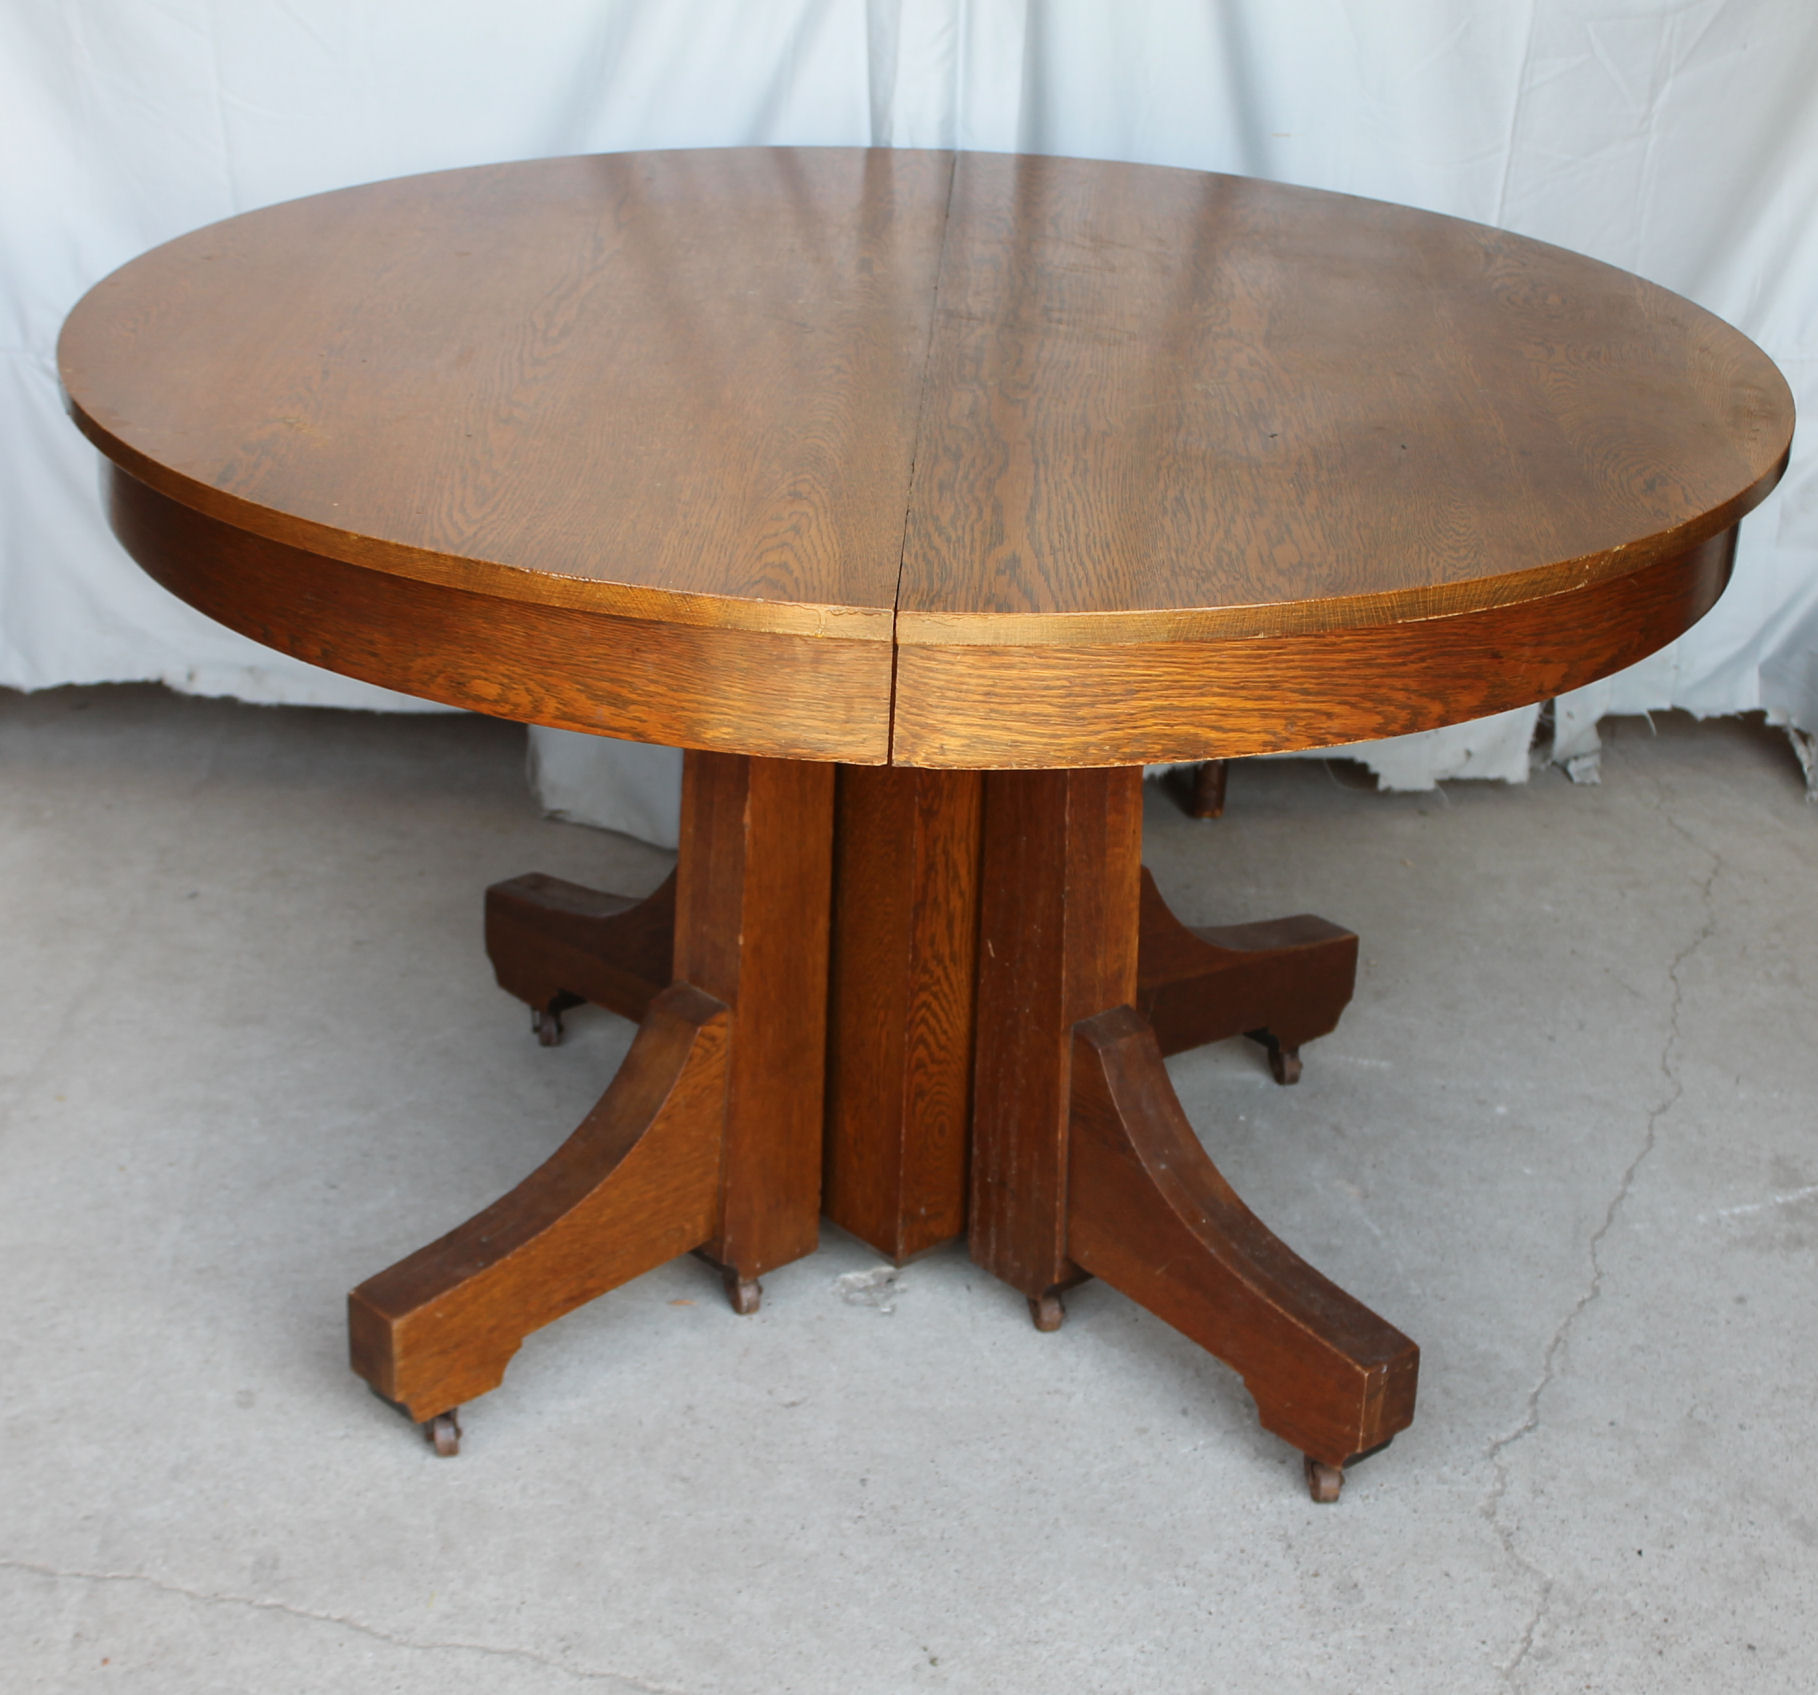 Antique Mission Style Round Oak Table, Round Oak Tables With Leaves